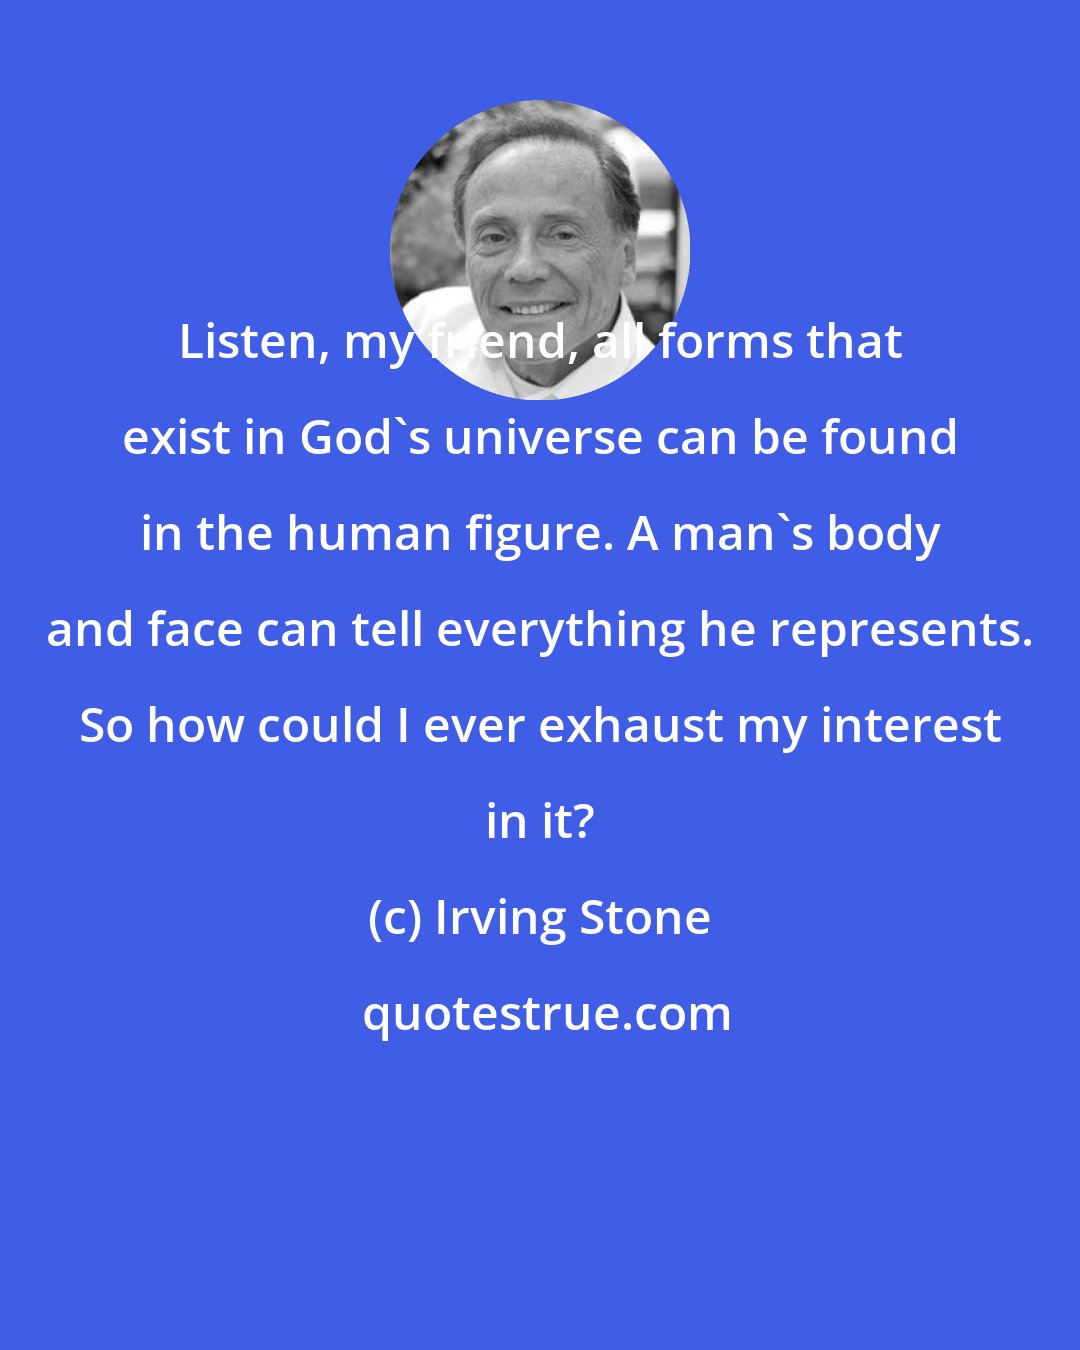 Irving Stone: Listen, my friend, all forms that exist in God's universe can be found in the human figure. A man's body and face can tell everything he represents. So how could I ever exhaust my interest in it?